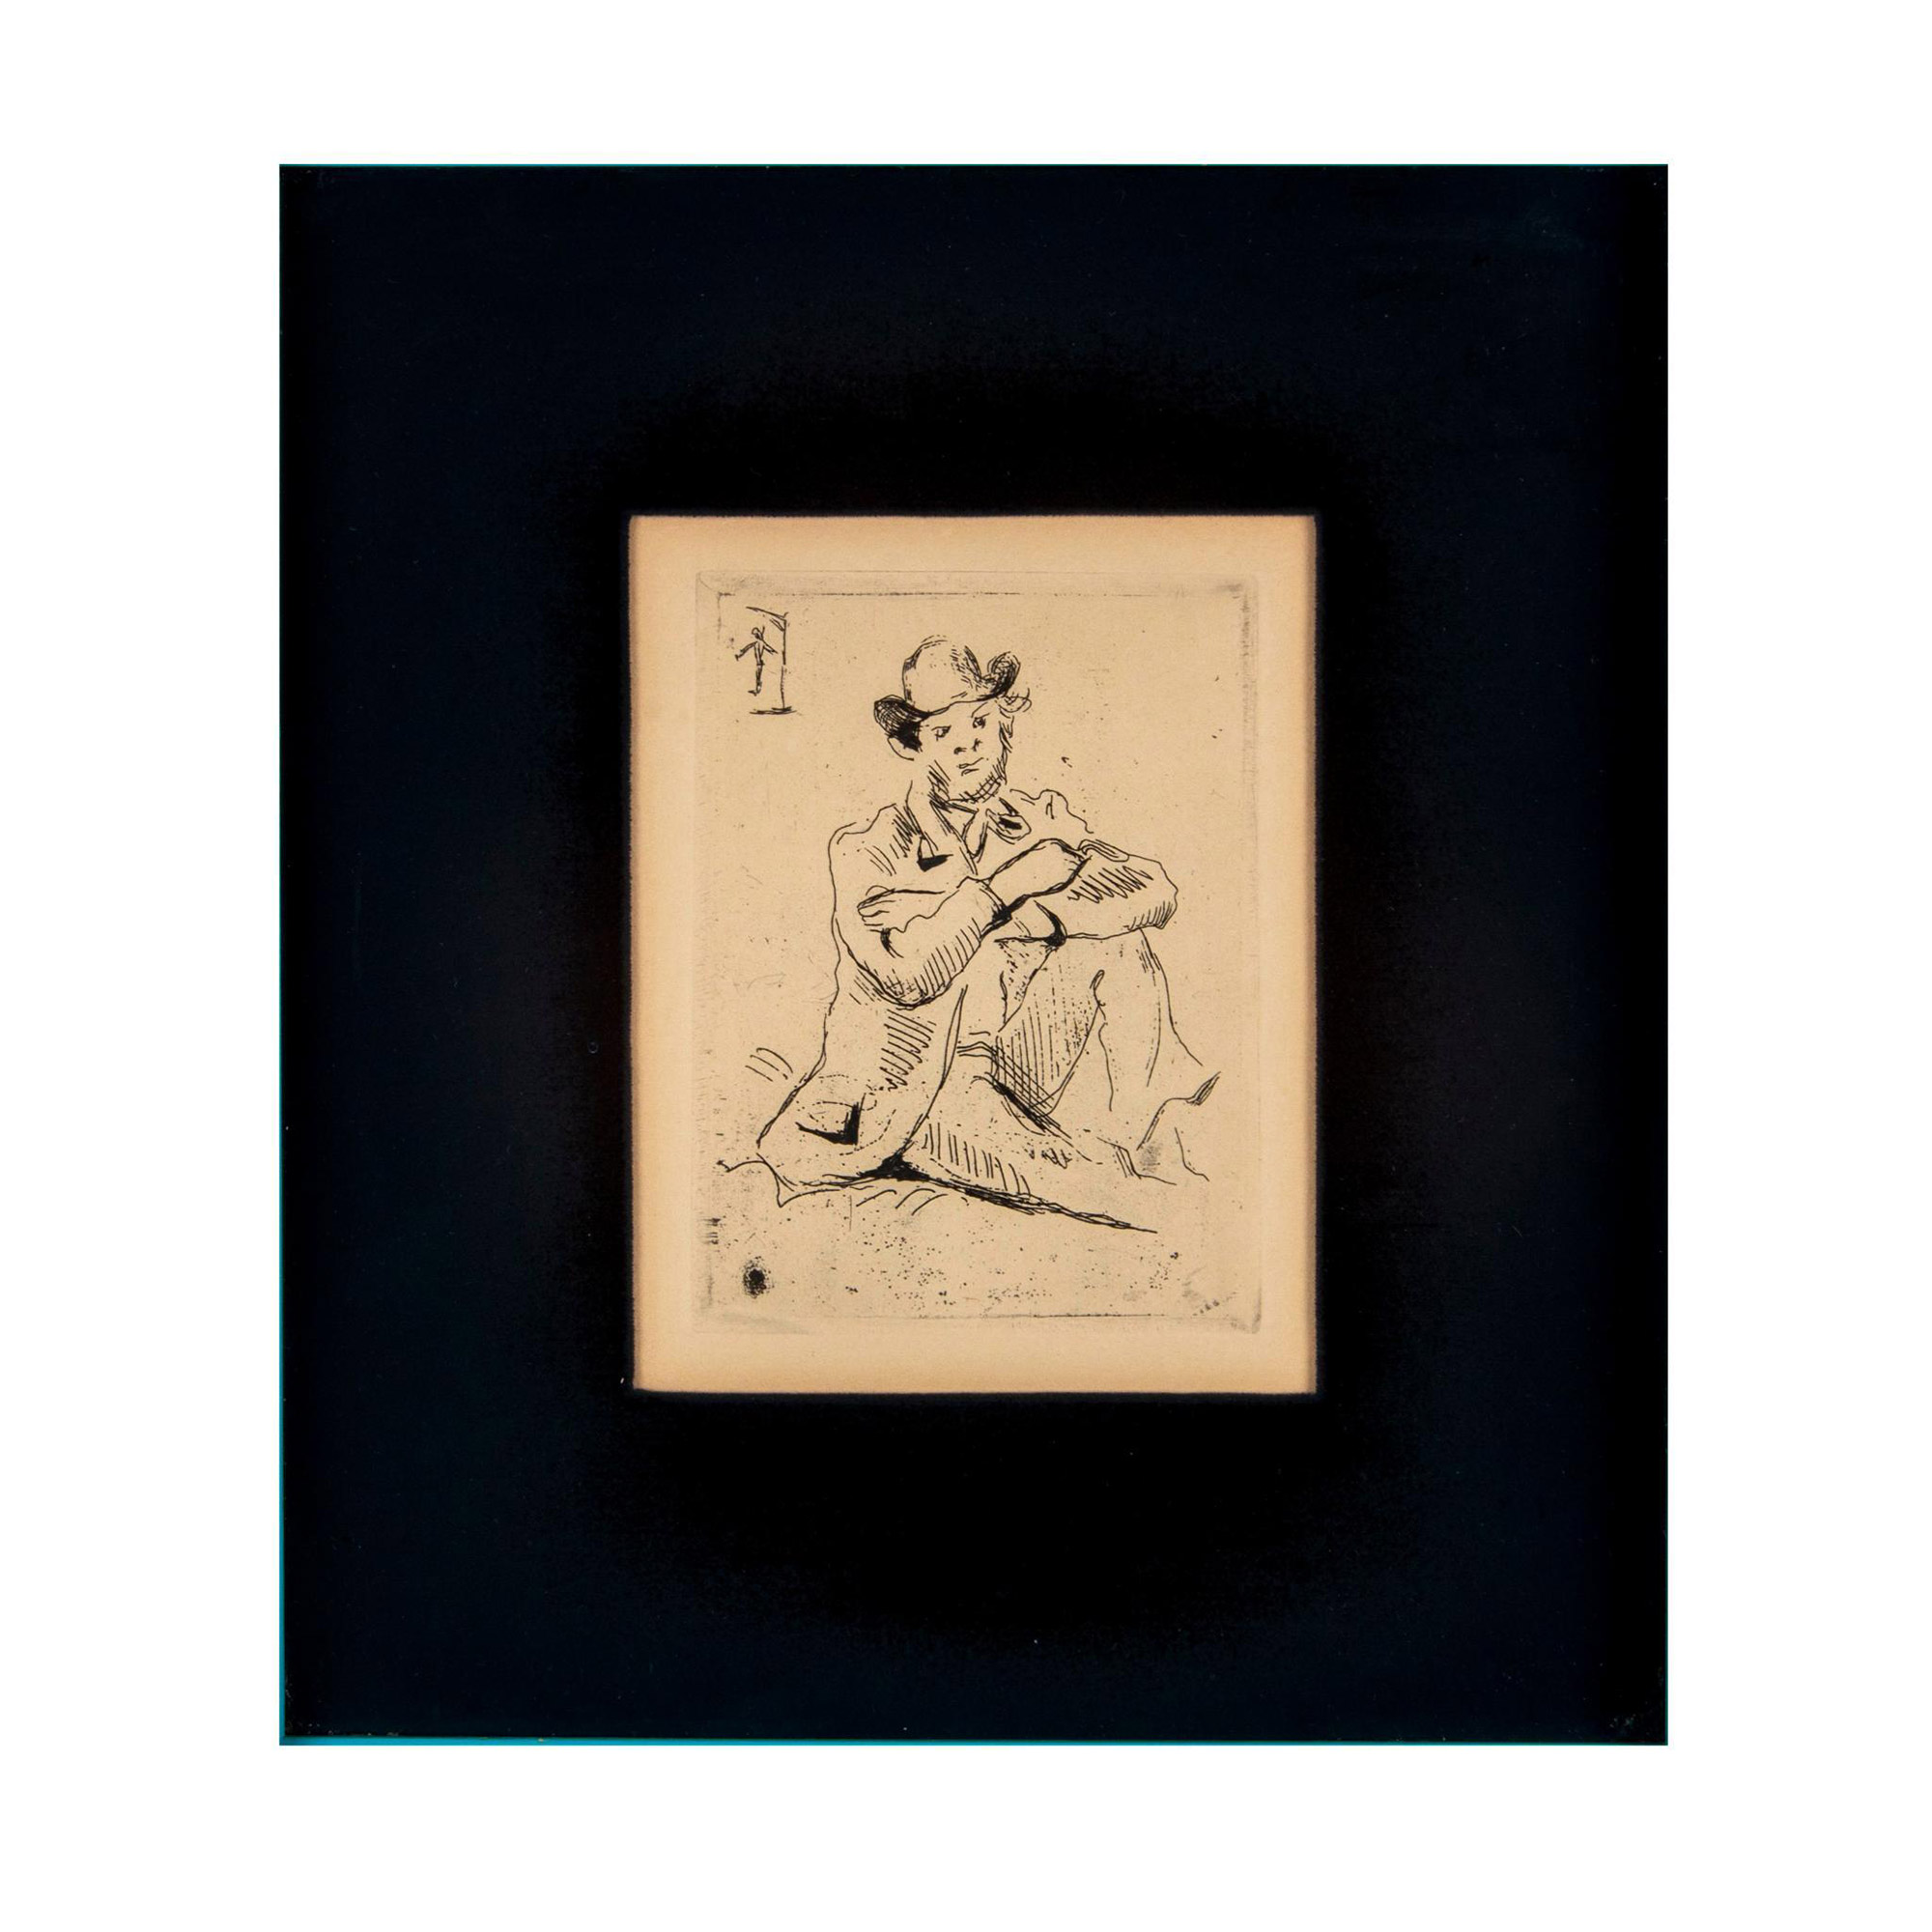 Paul Cezanne (Aft.) Drypoint Etching on Cream Paper - Image 2 of 5